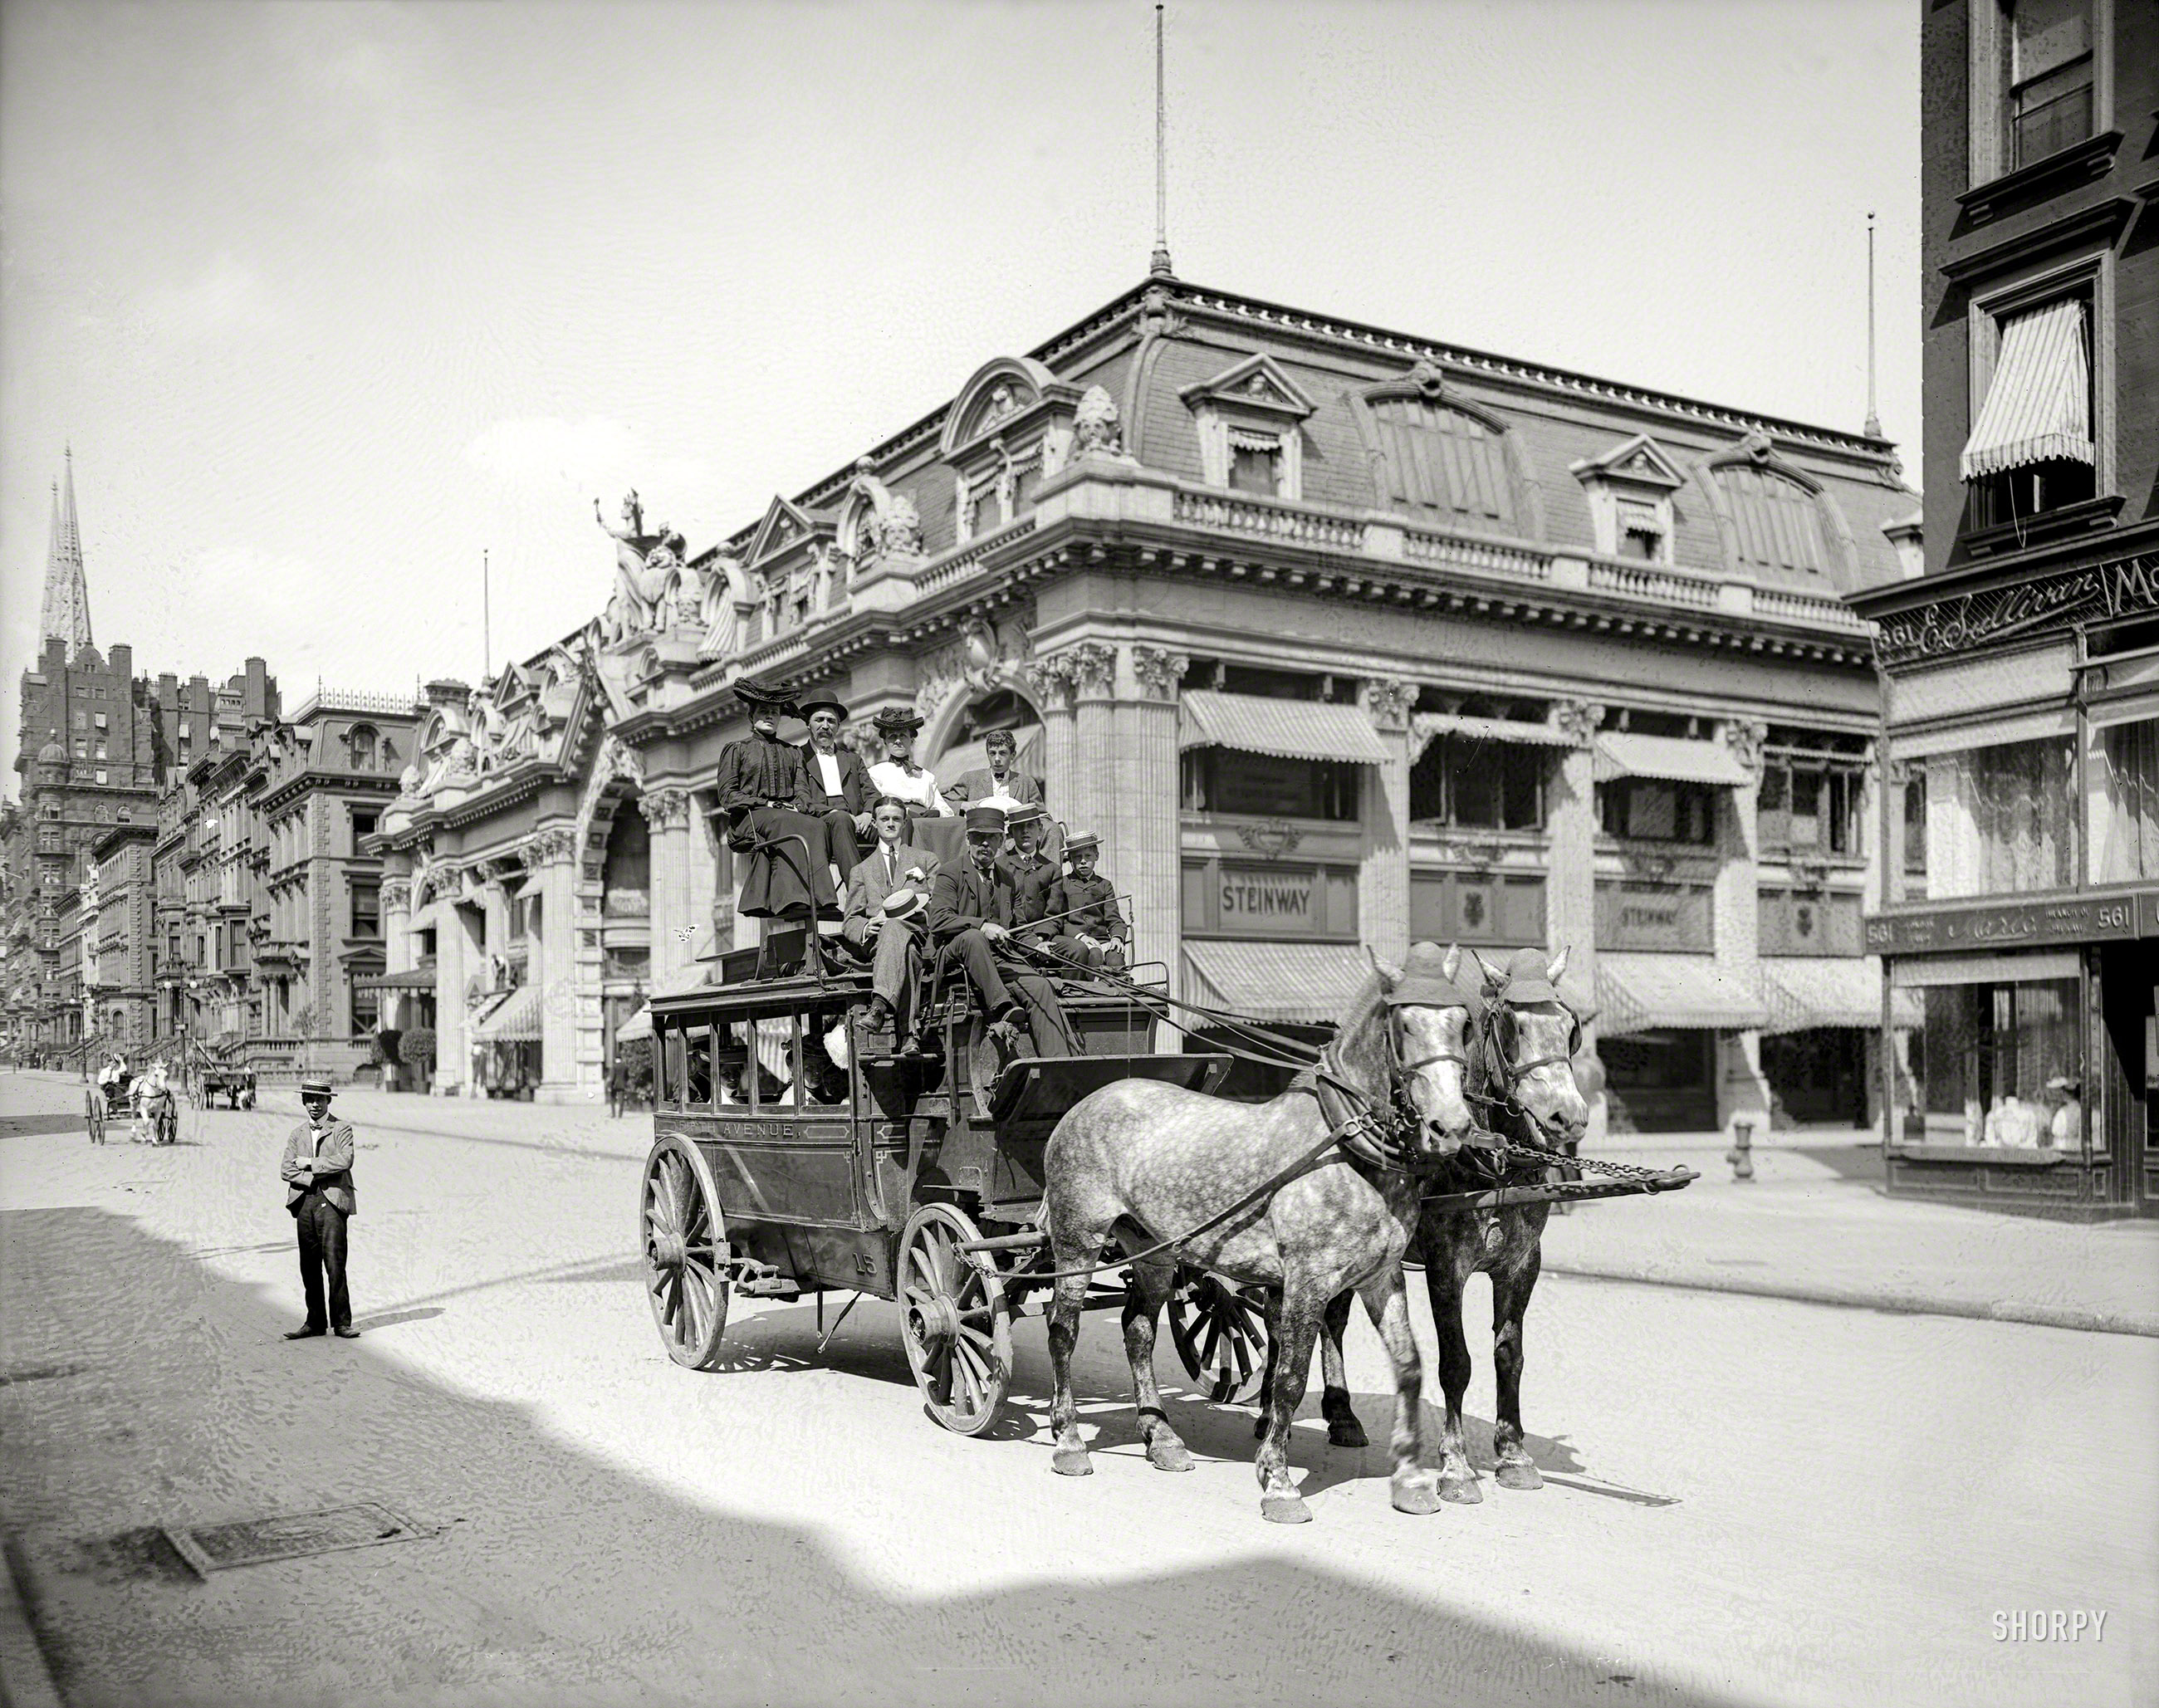 Circa 1906. "A Fifth Avenue stage, New York." Where even the horses have hats. 8x10 inch dry plate glass negative, Detroit Publishing Company. View full size.